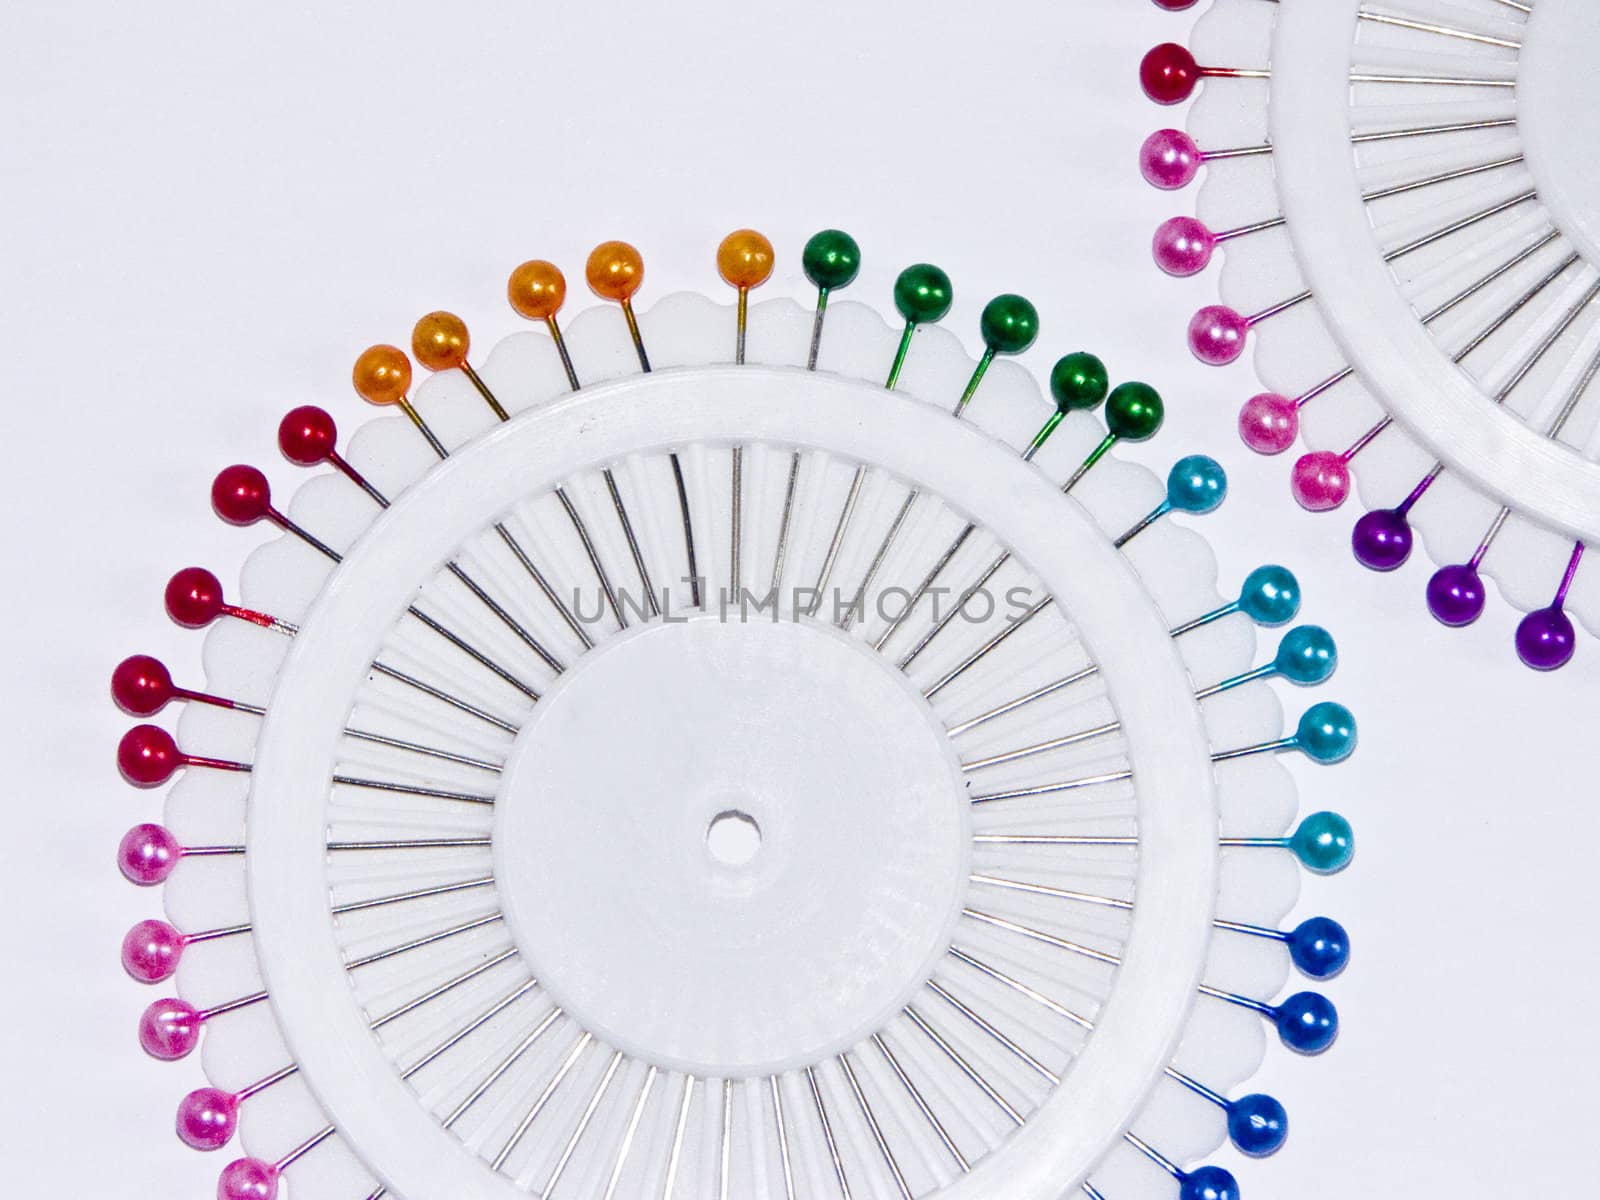 The image of sets of needles on a white background